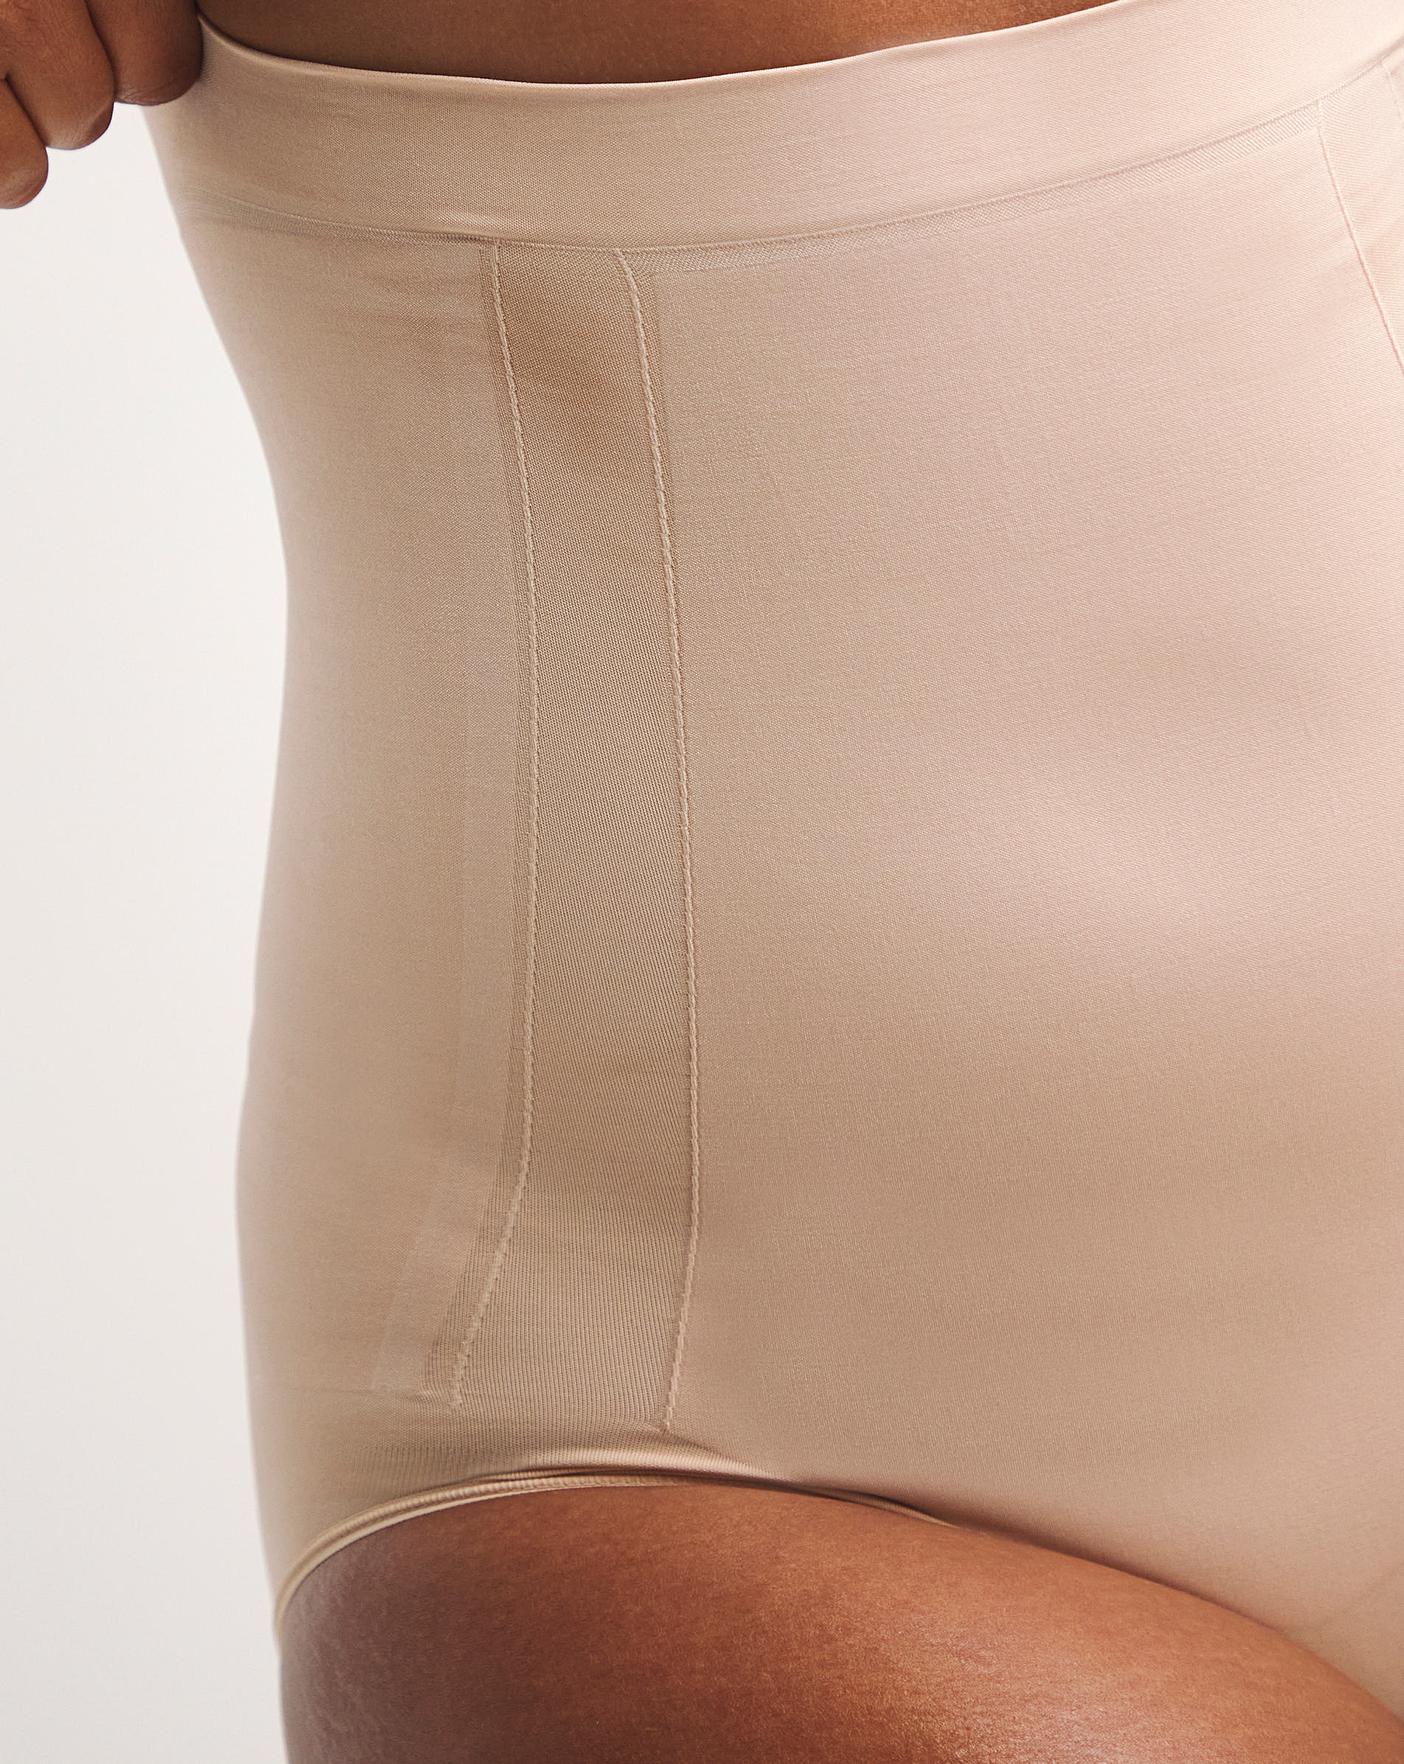 Spanx Firm Control Oncore High-Waisted Briefs, Nude at John Lewis & Partners